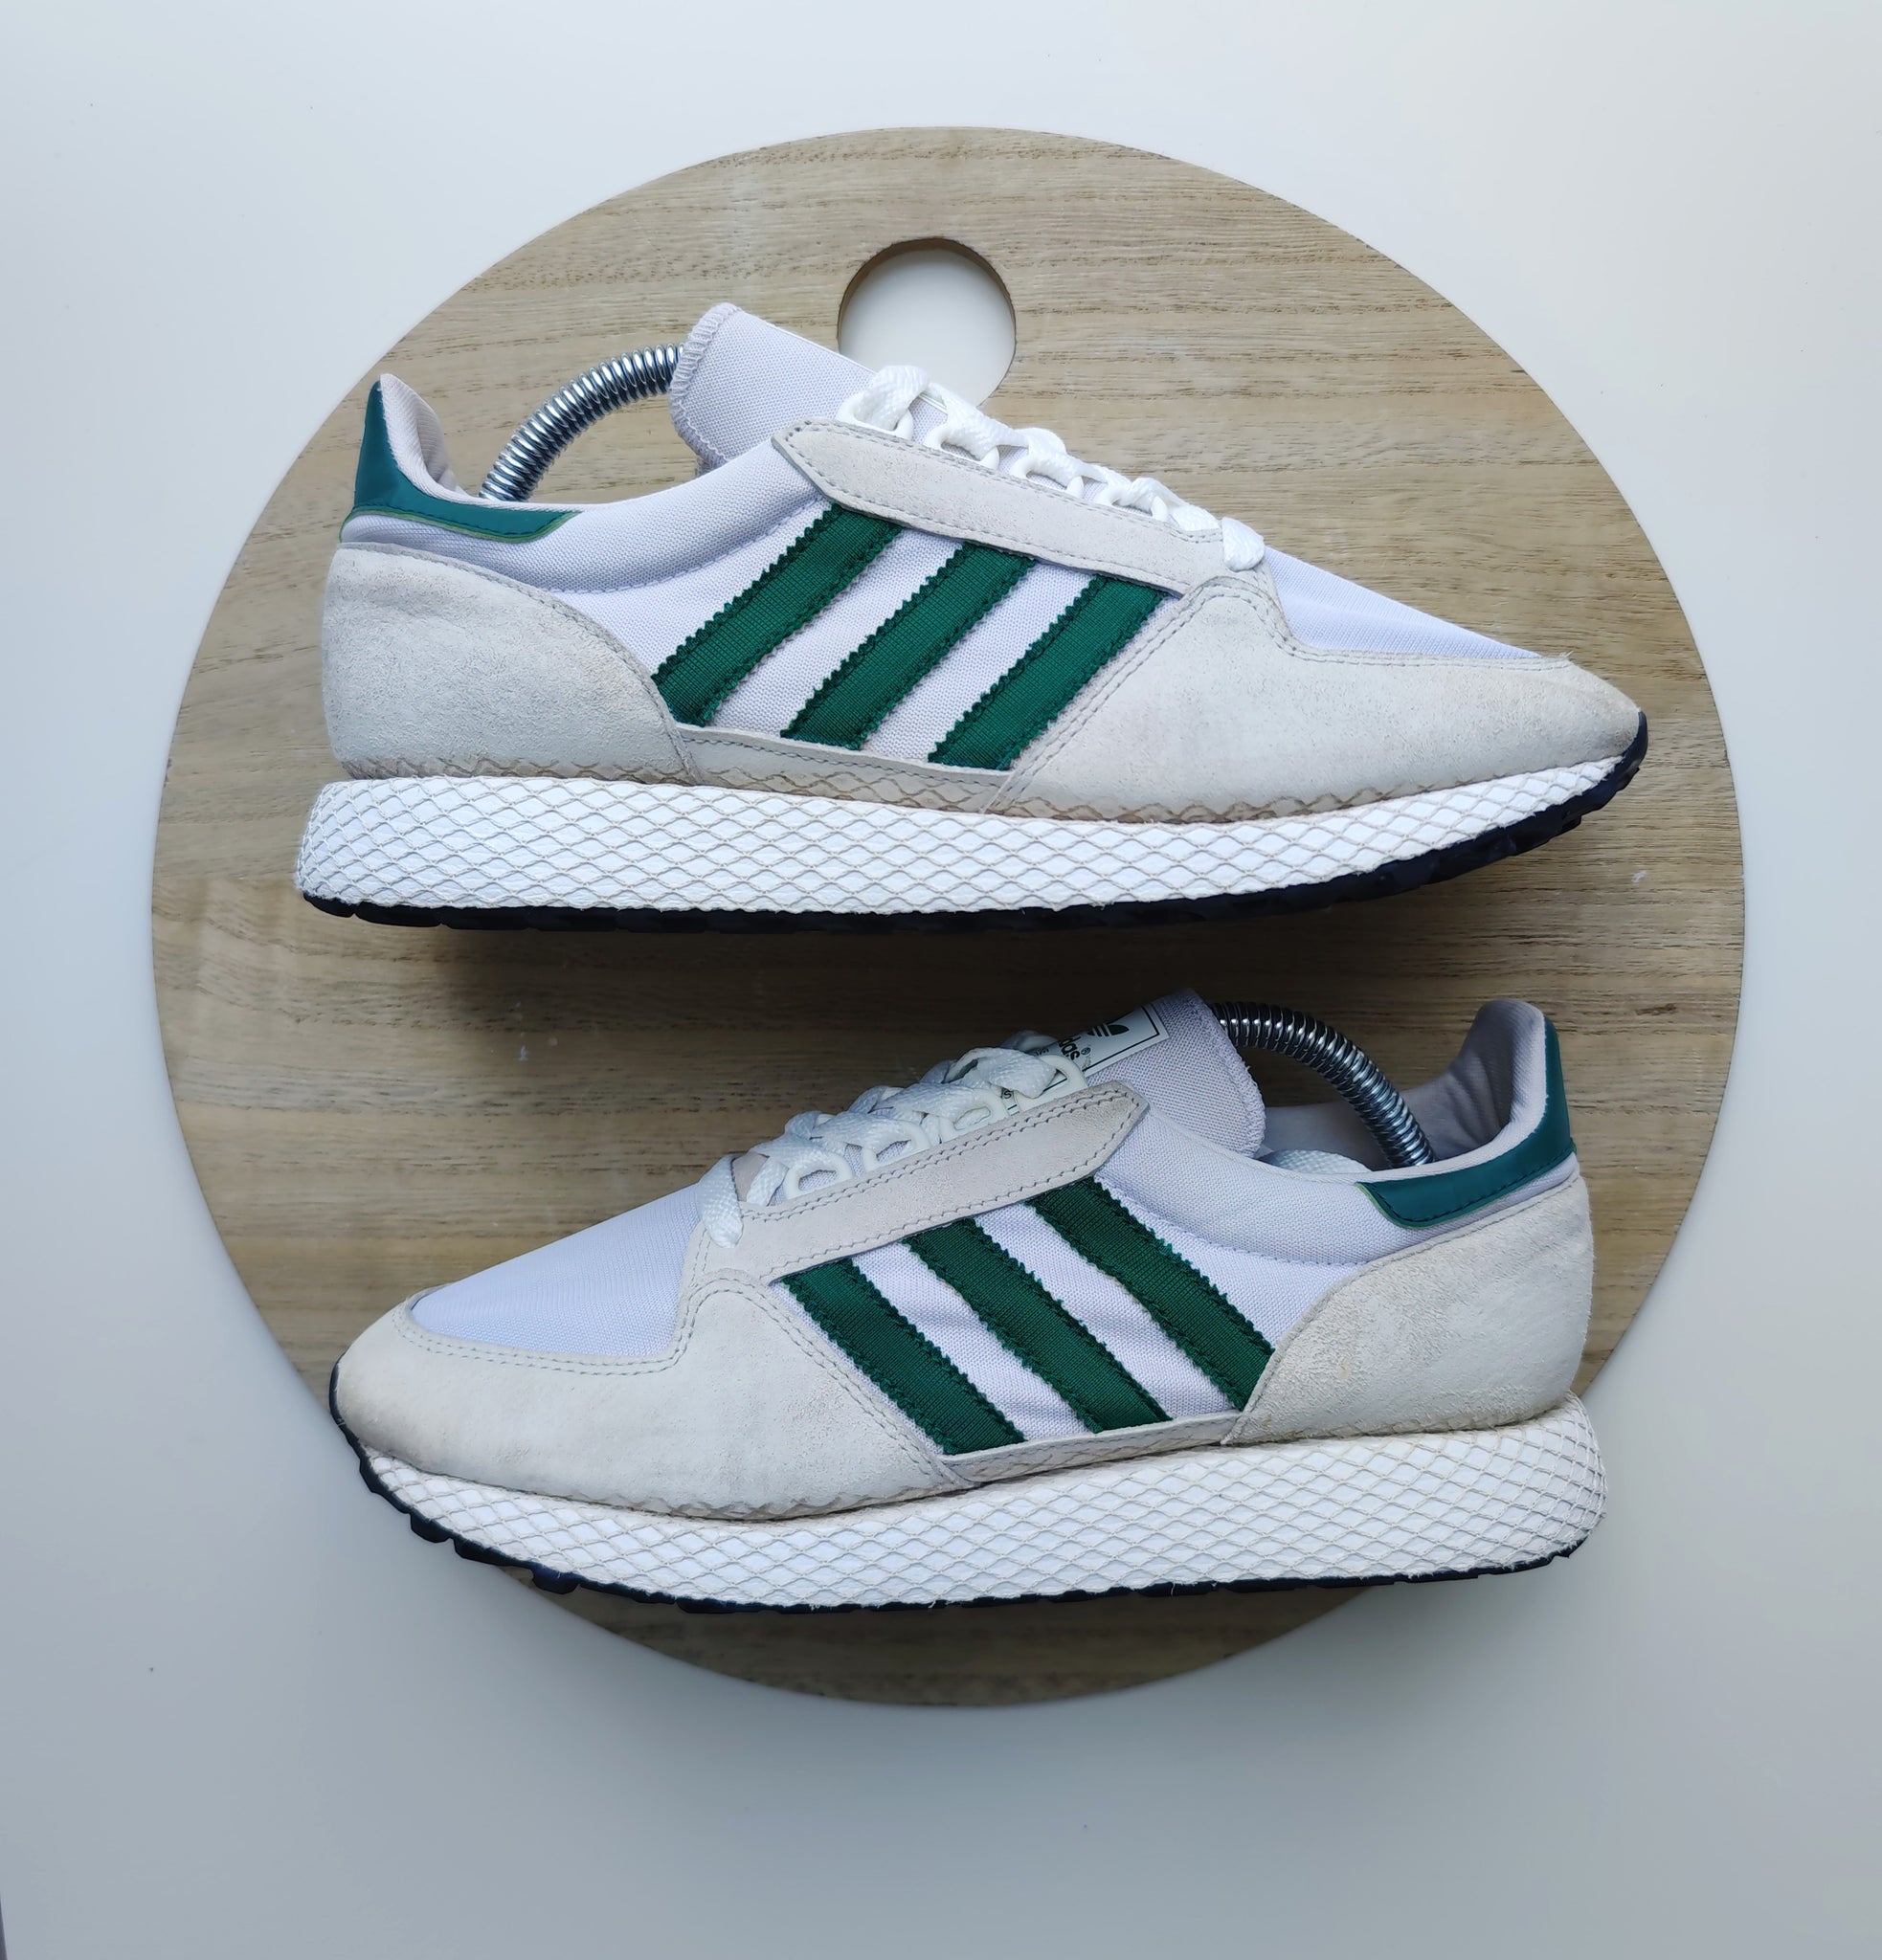 Adidas Forest Grove Crystal White/Core Green T.41 1/3